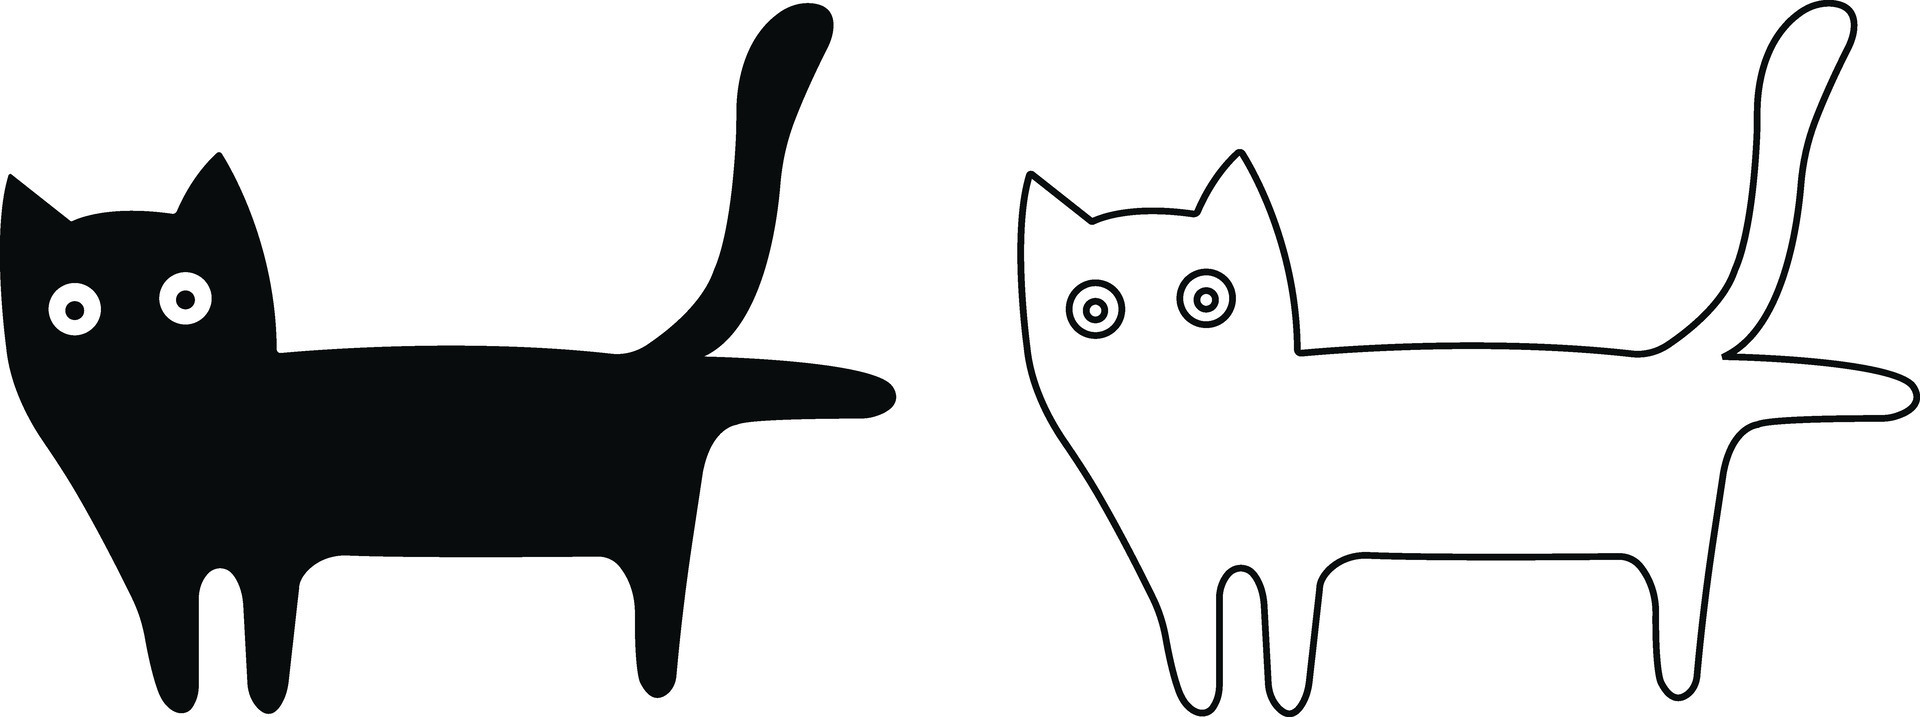 White cat icon isolated on transparent background Vector Image